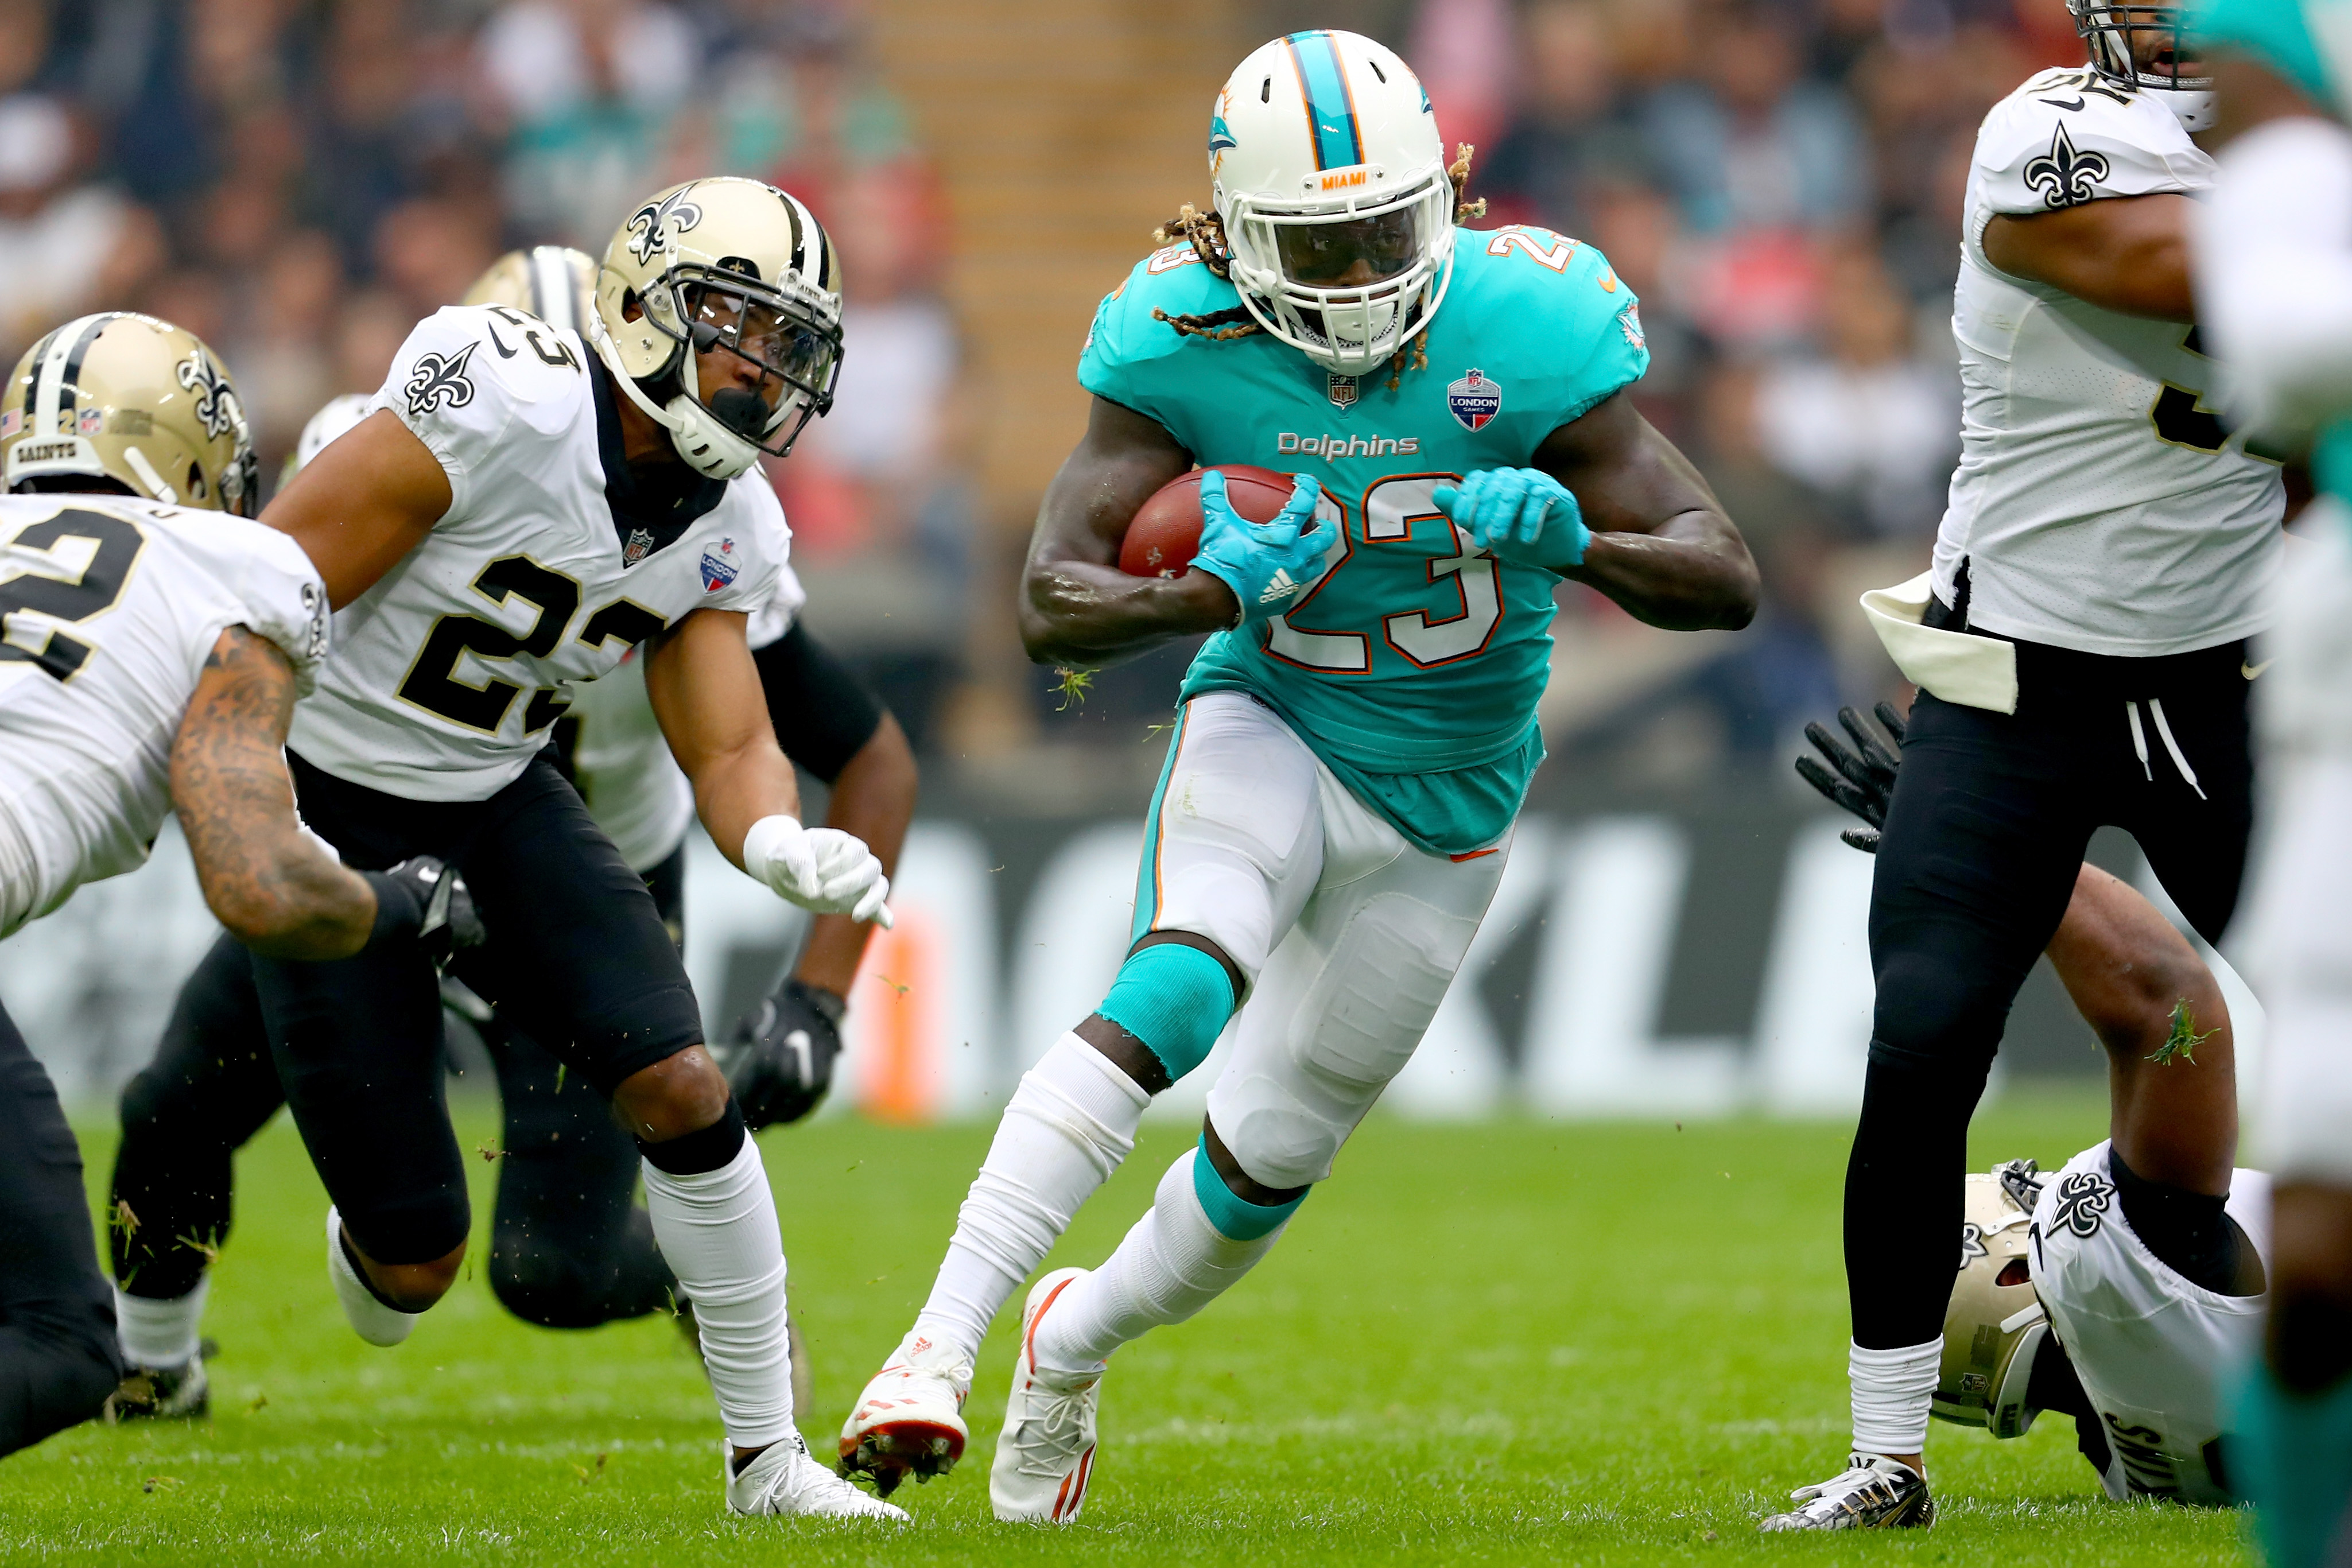 LONDON, ENGLAND - OCTOBER 01: Jay Ajayi of the Miami Dolphins in action during the NFL match between New Orleans Saints and Miami Dolphins at Wembley Stadium on October 1, 2017 in London, England.